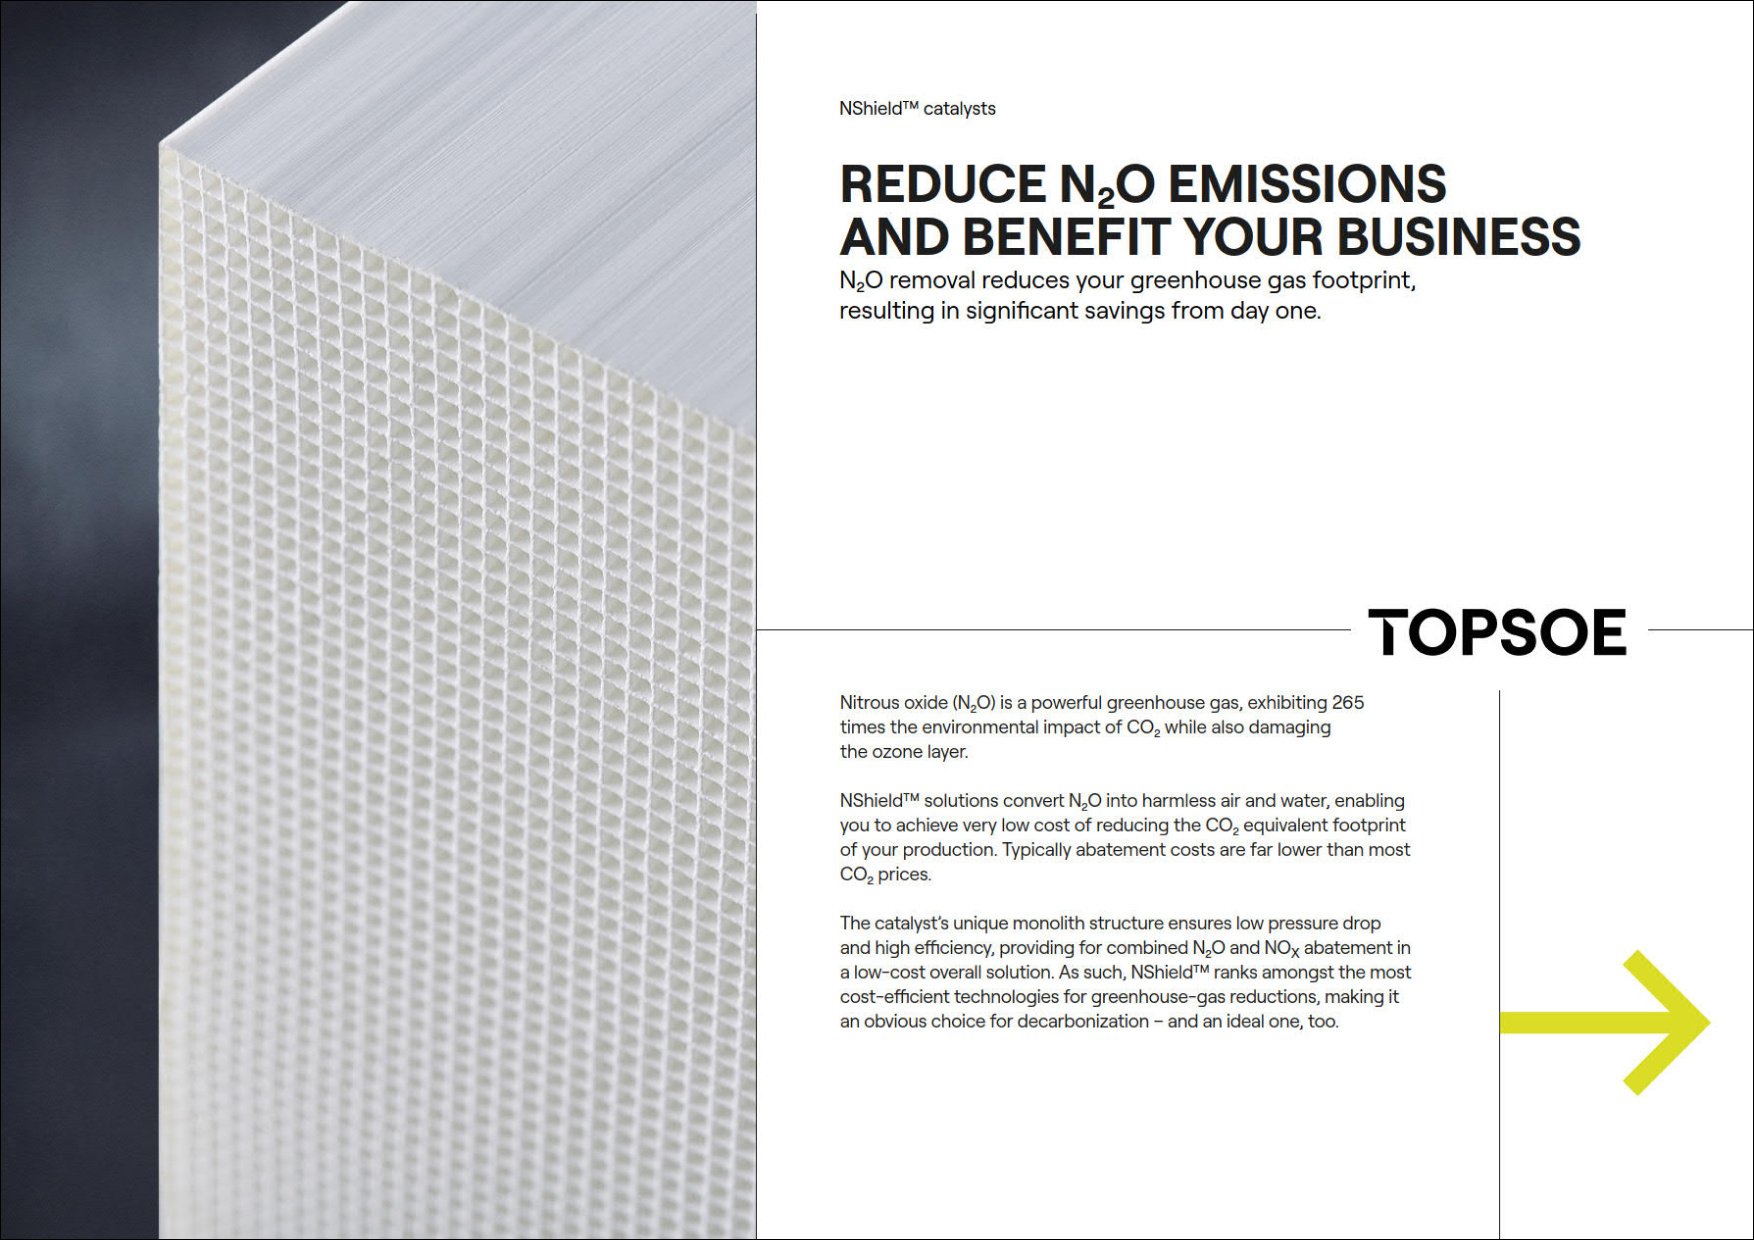 Reduce N2O emissions and benefit your business